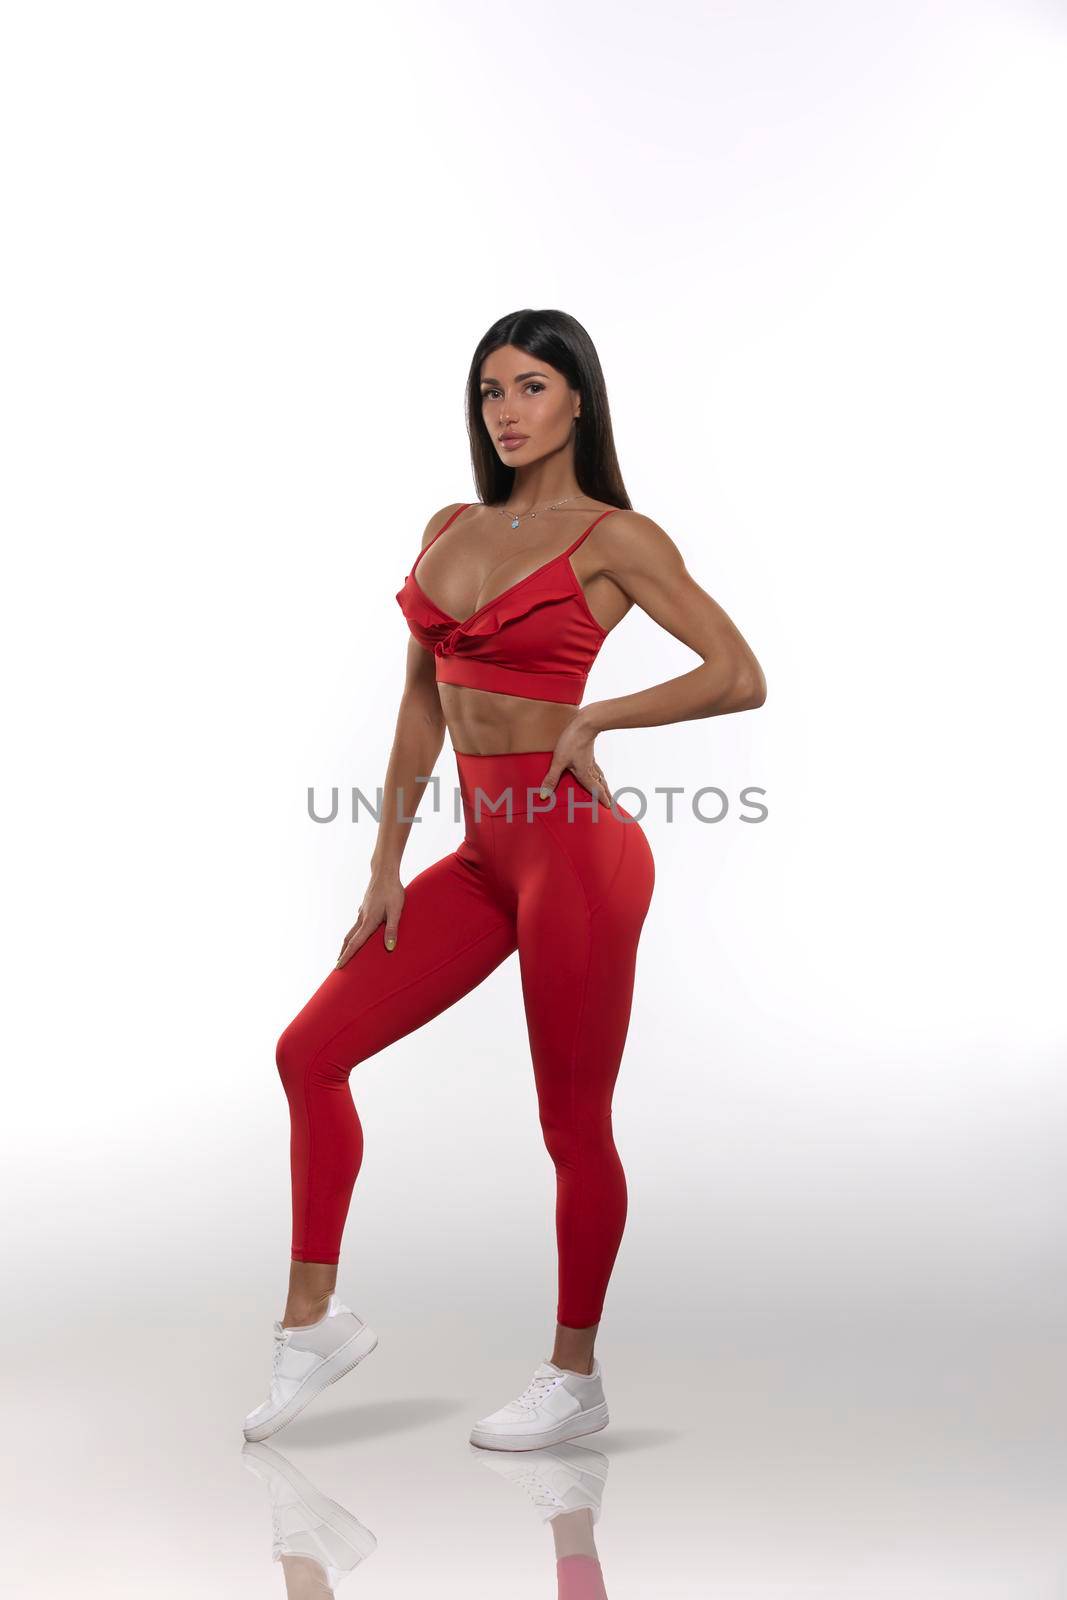 girl in red leggings and a top on a white background by but_photo